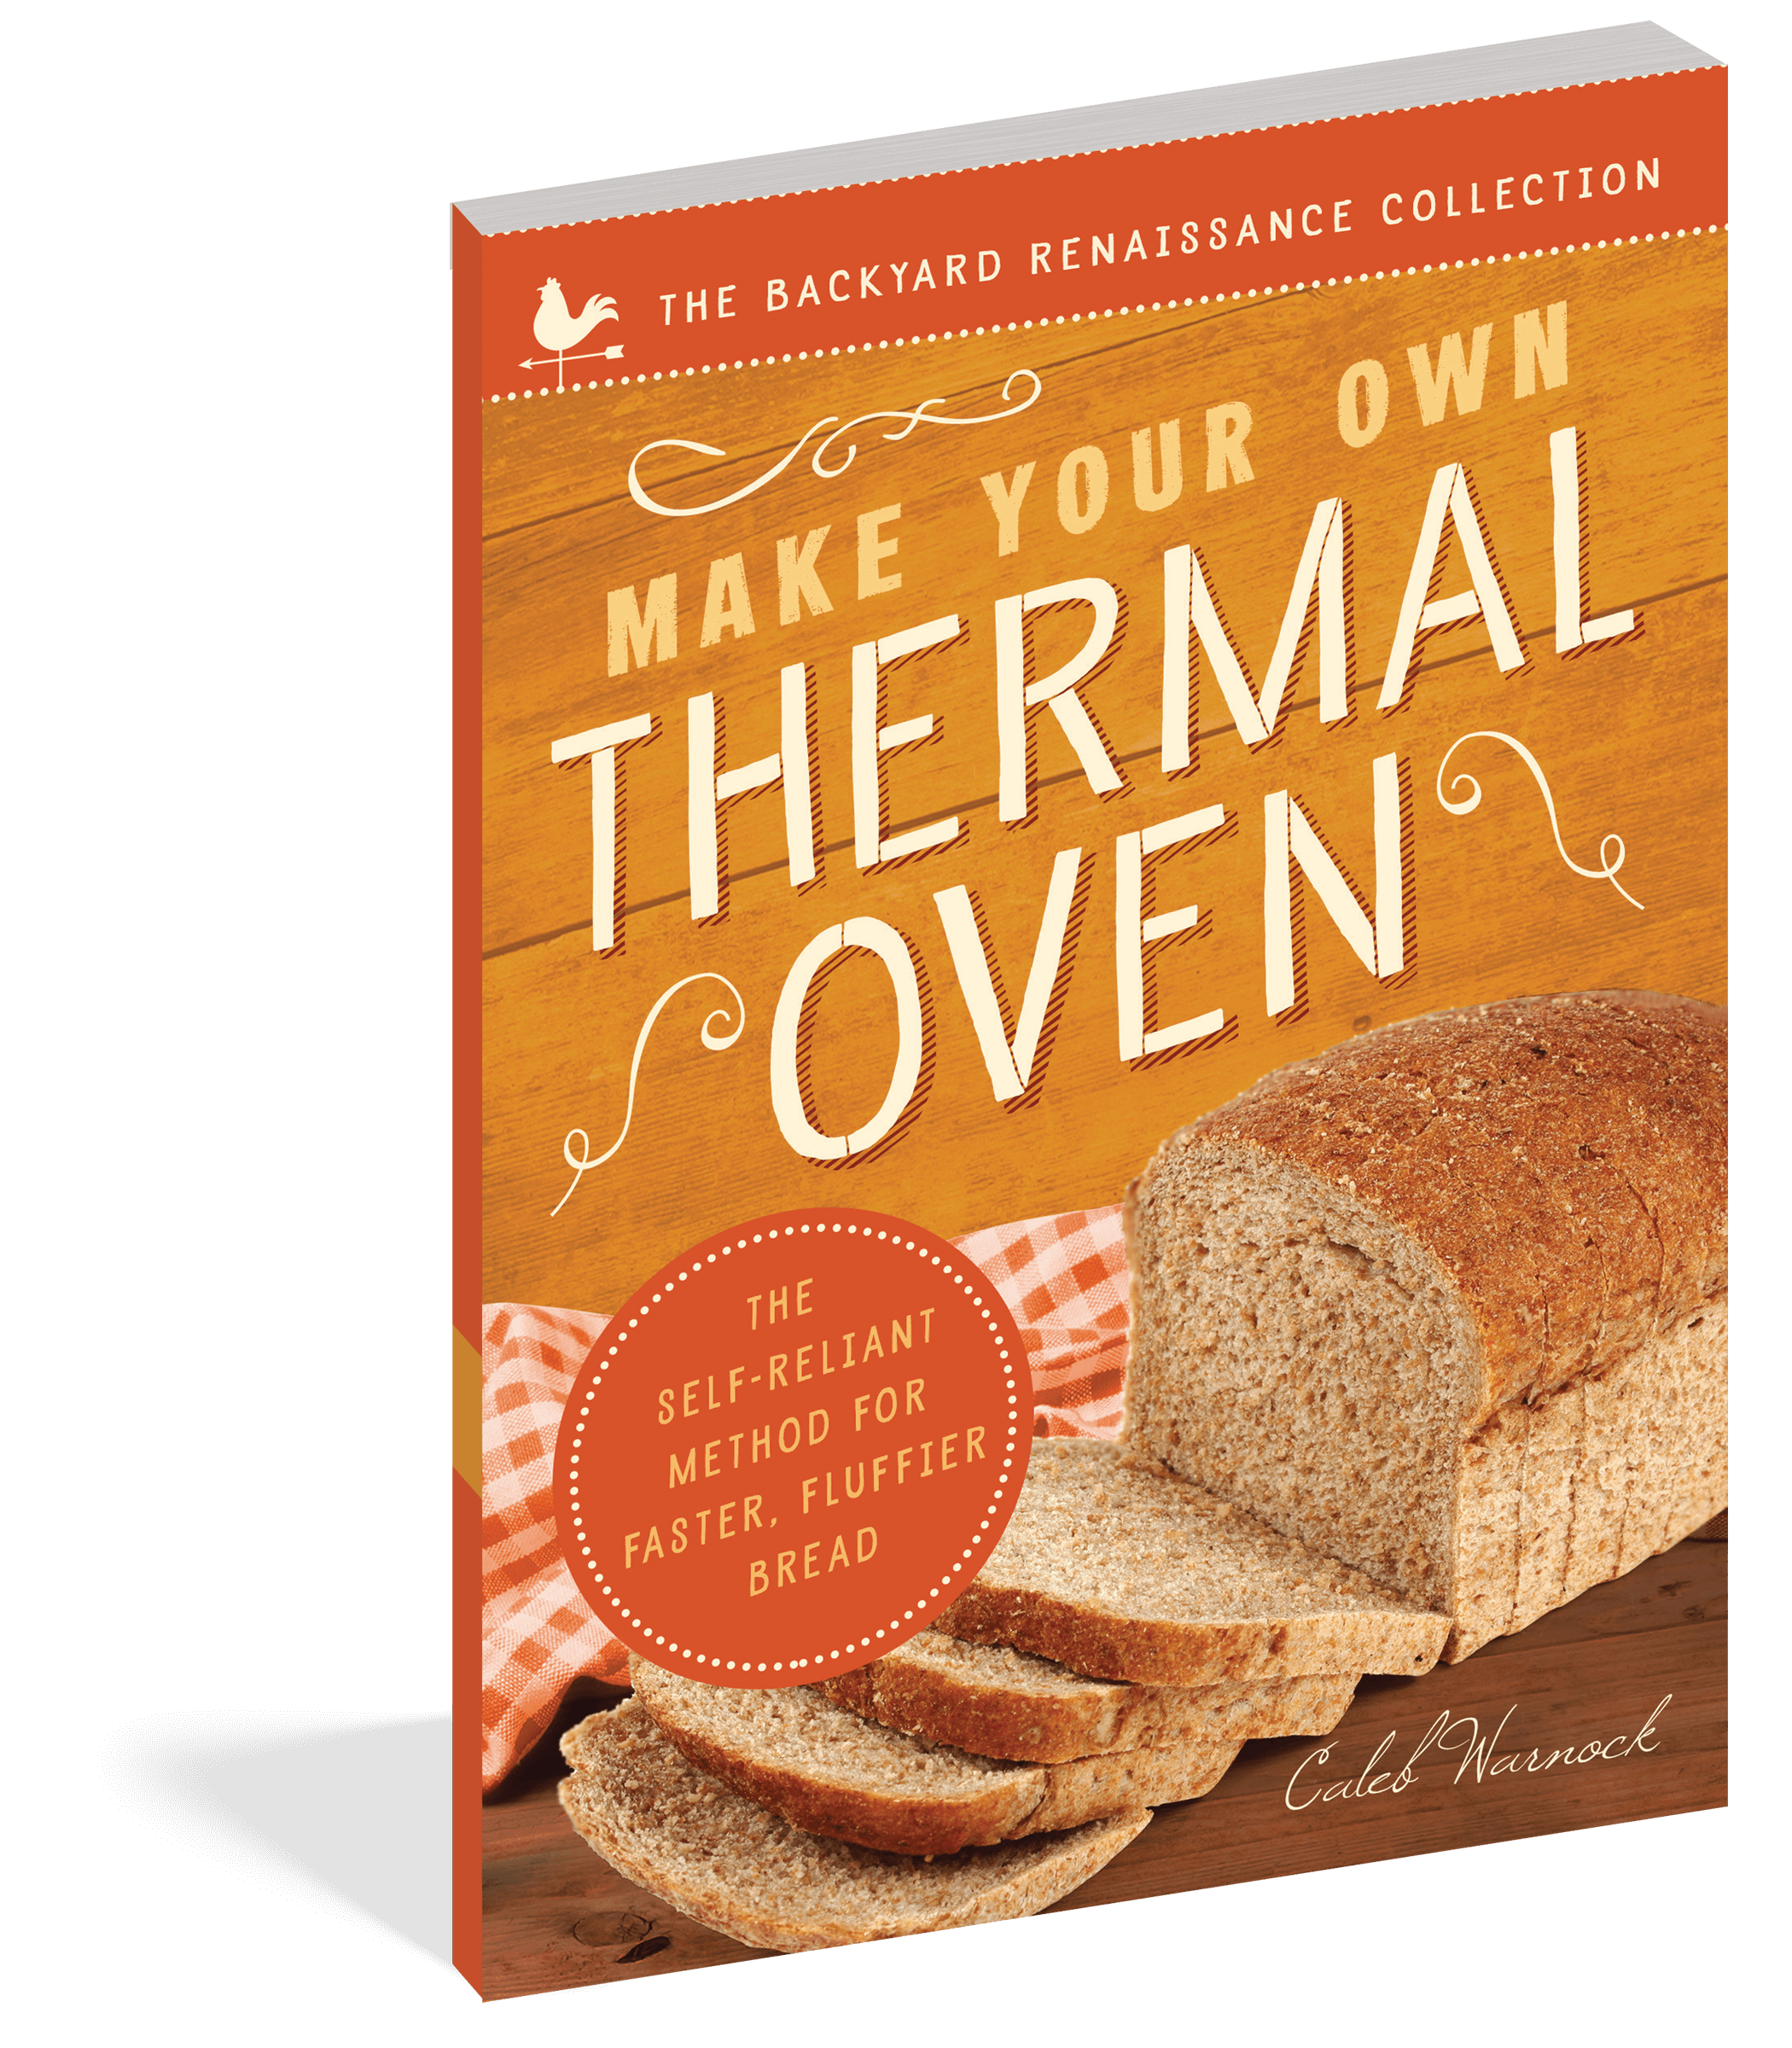 The cover of the book Make Your Own Thermal Oven.